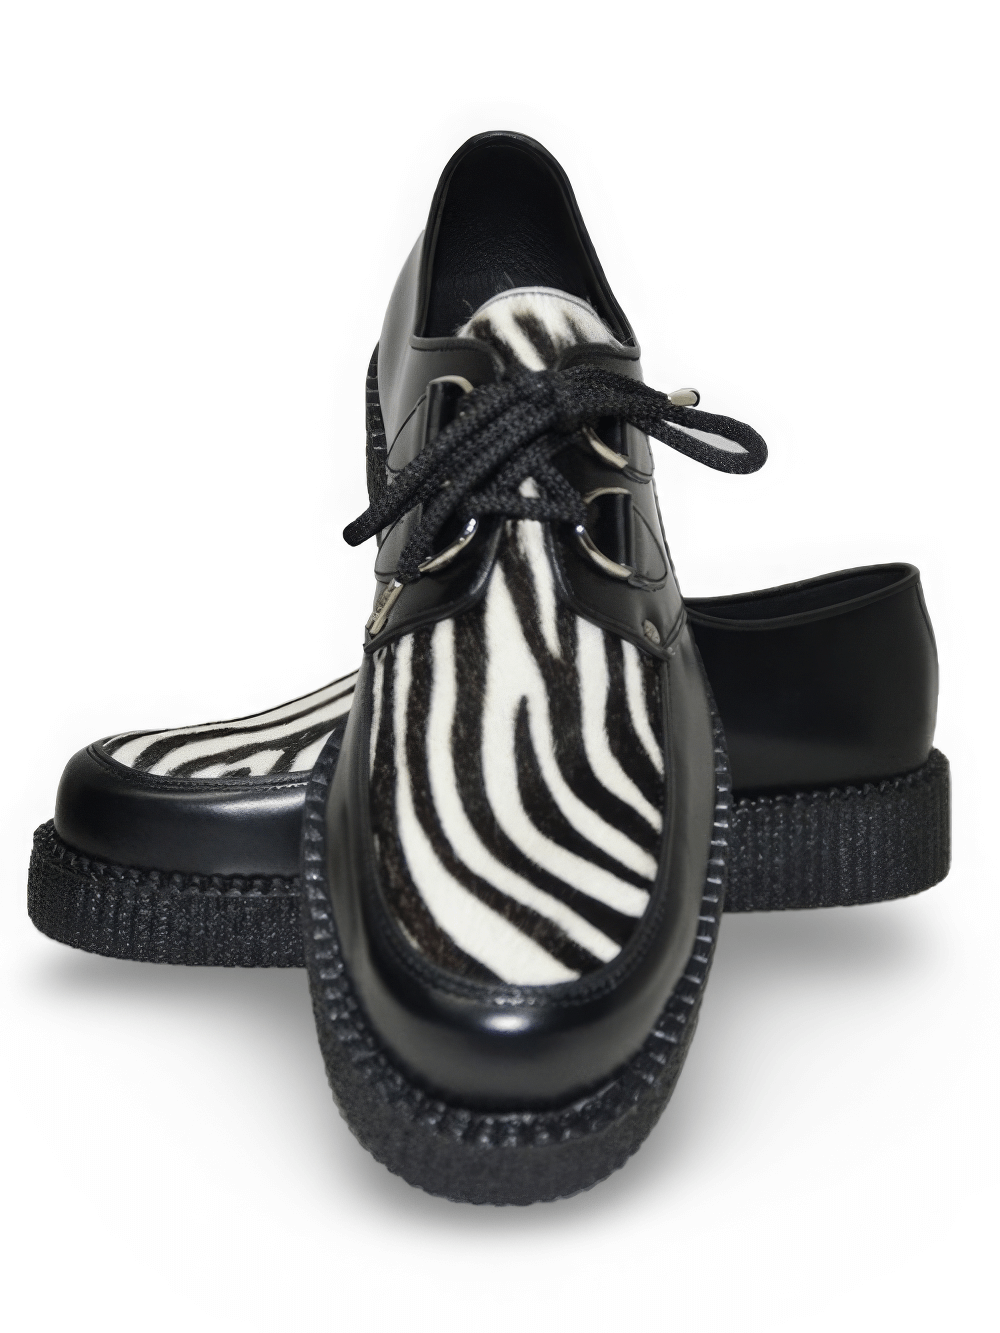 Unisex Leather and Fur Creeper Shoes with Rubber Sole